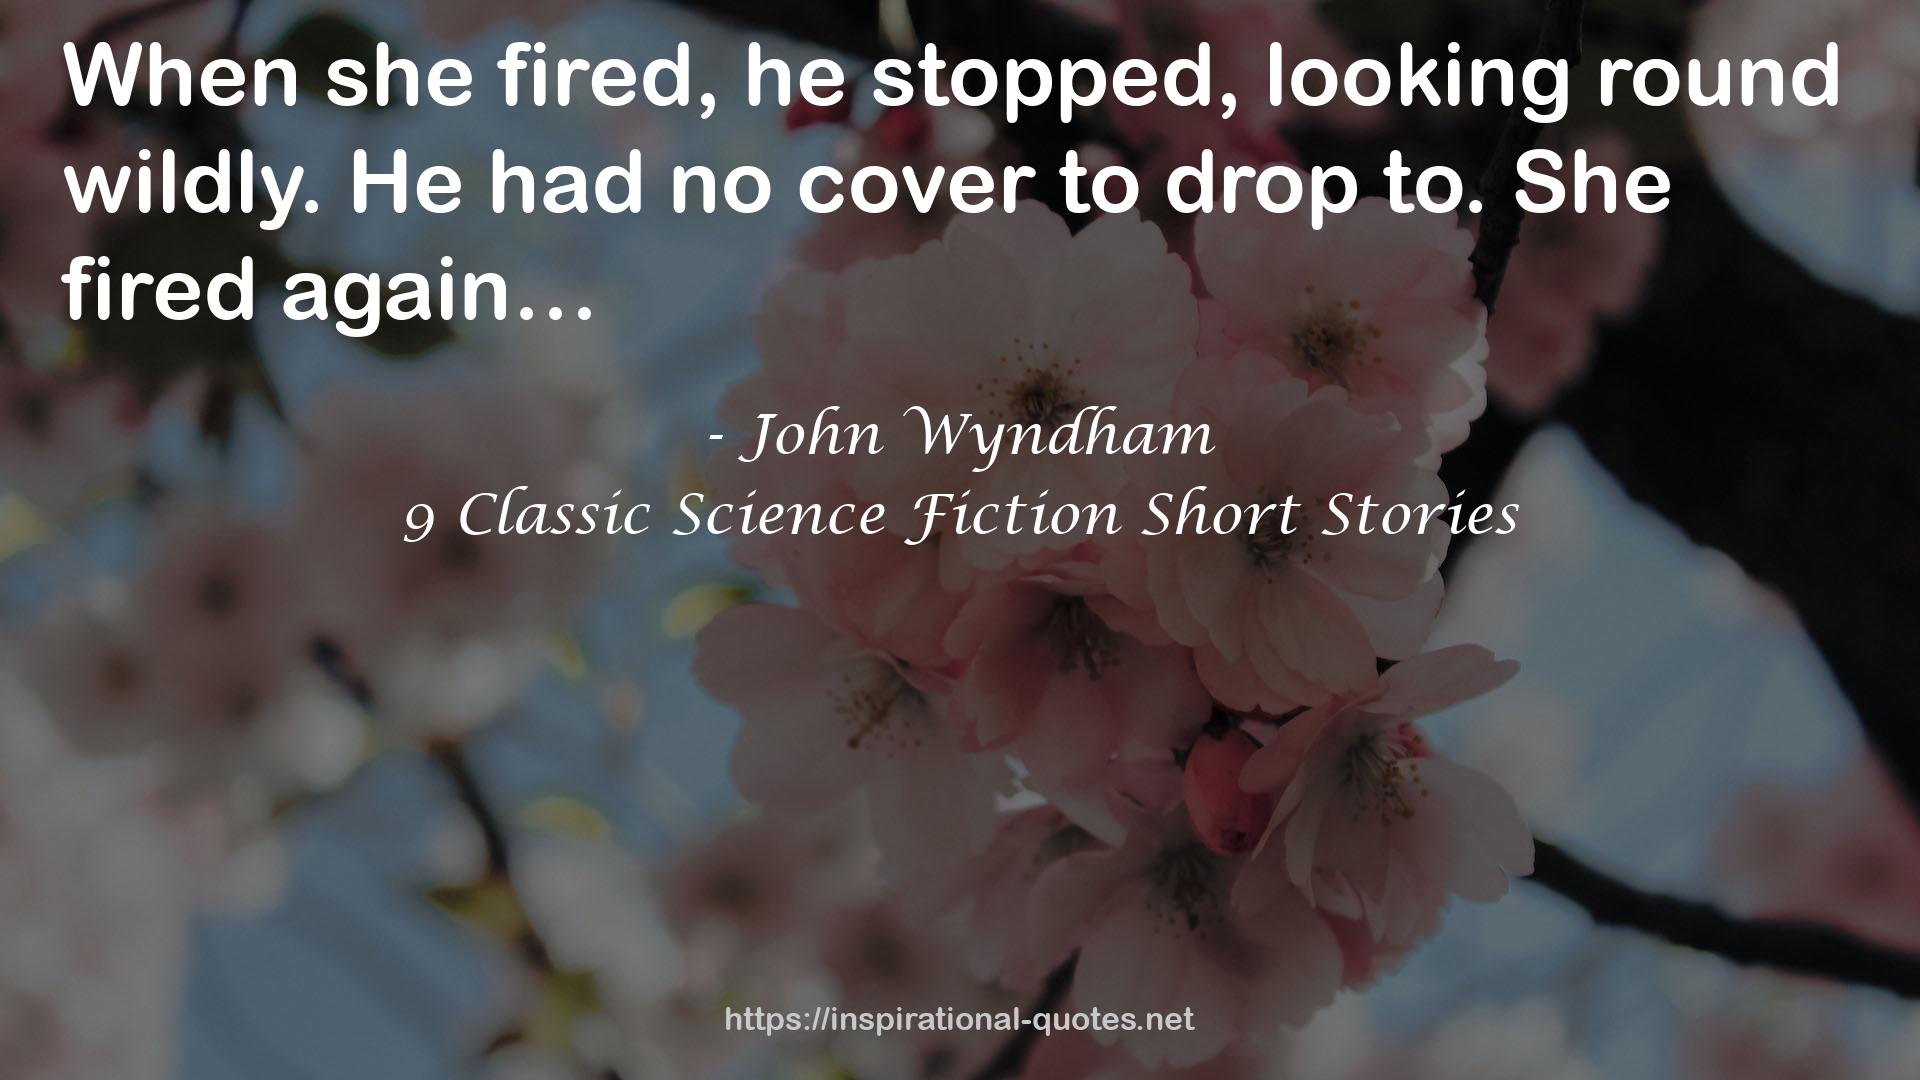 9 Classic Science Fiction Short Stories QUOTES